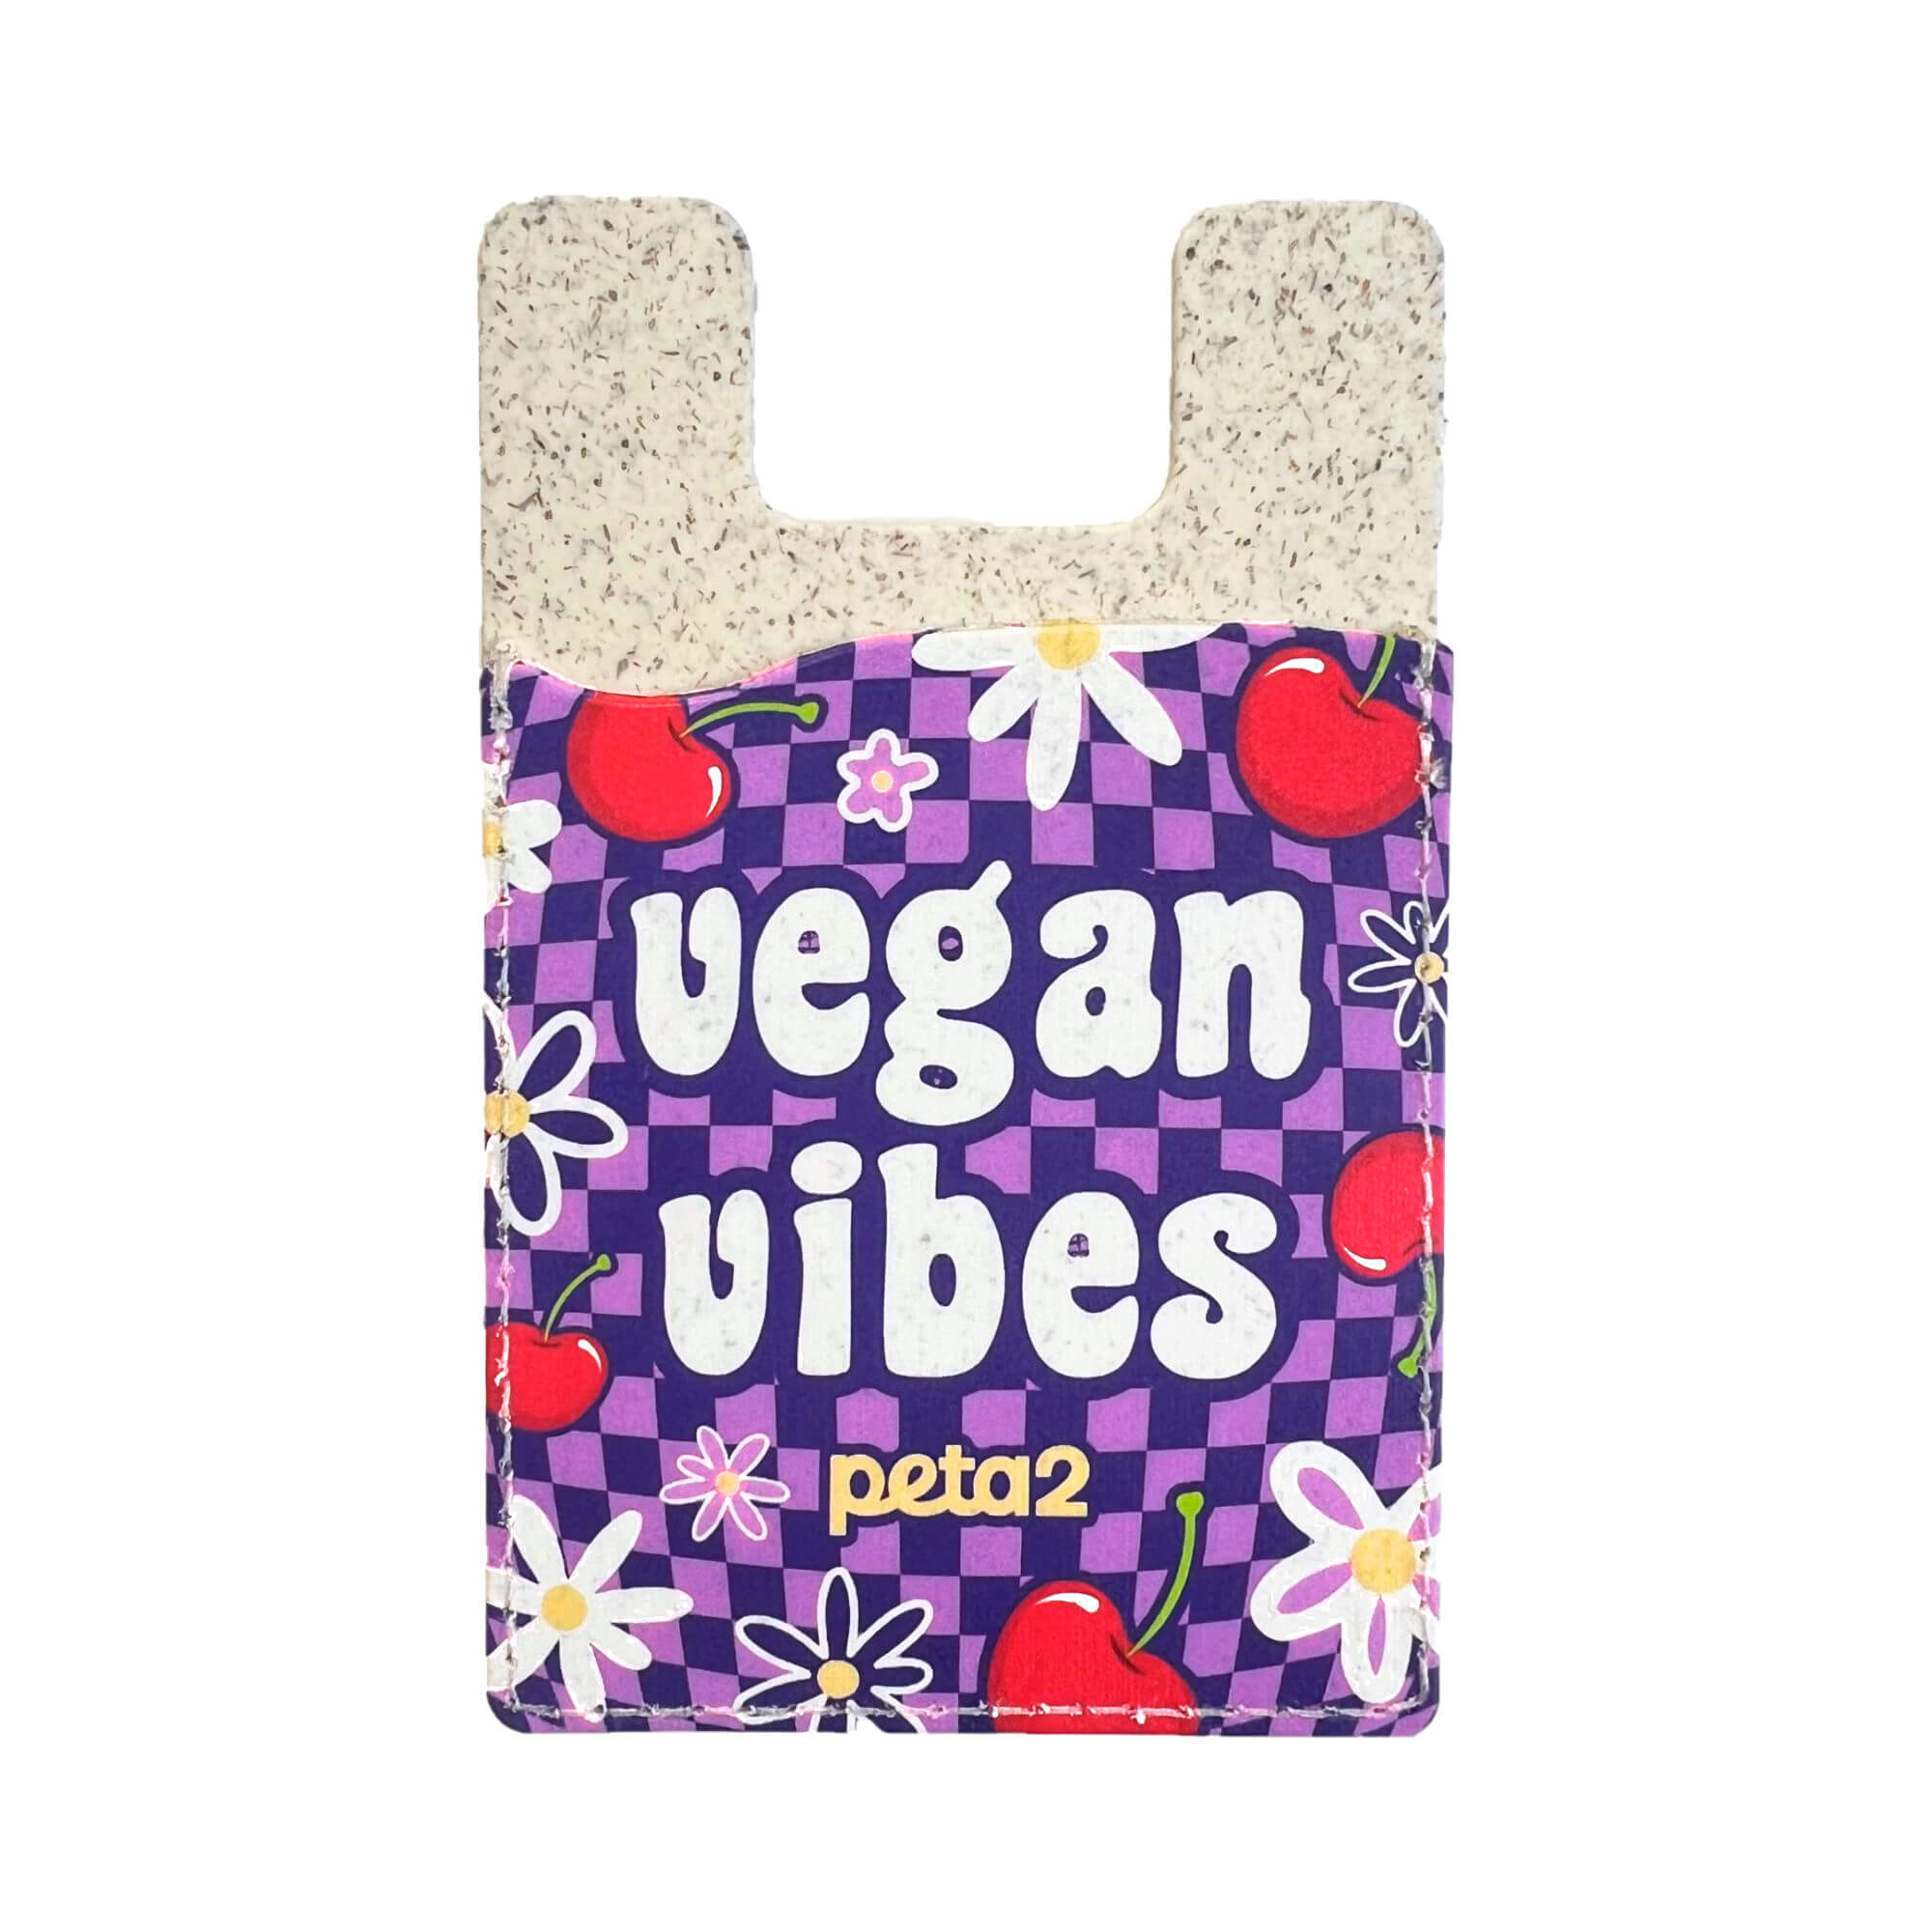 A purple phone card holder that reads "Vegan vibes" with illustrations of flowers and cherries